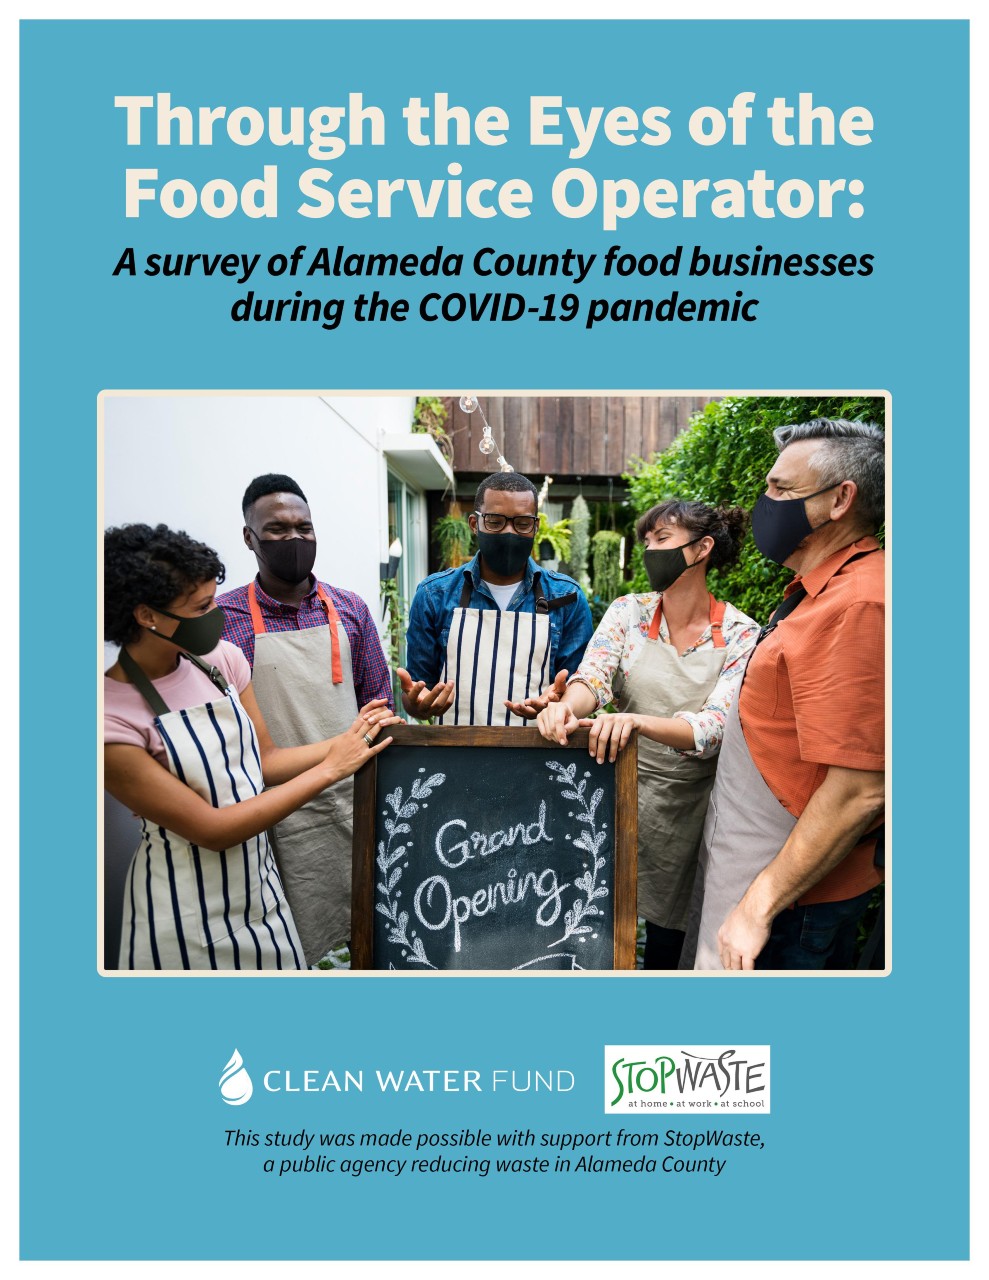 Through the Eyes of the Food Service Operator: A survey of Alameda County food businesses during the COVID-19 pandemic